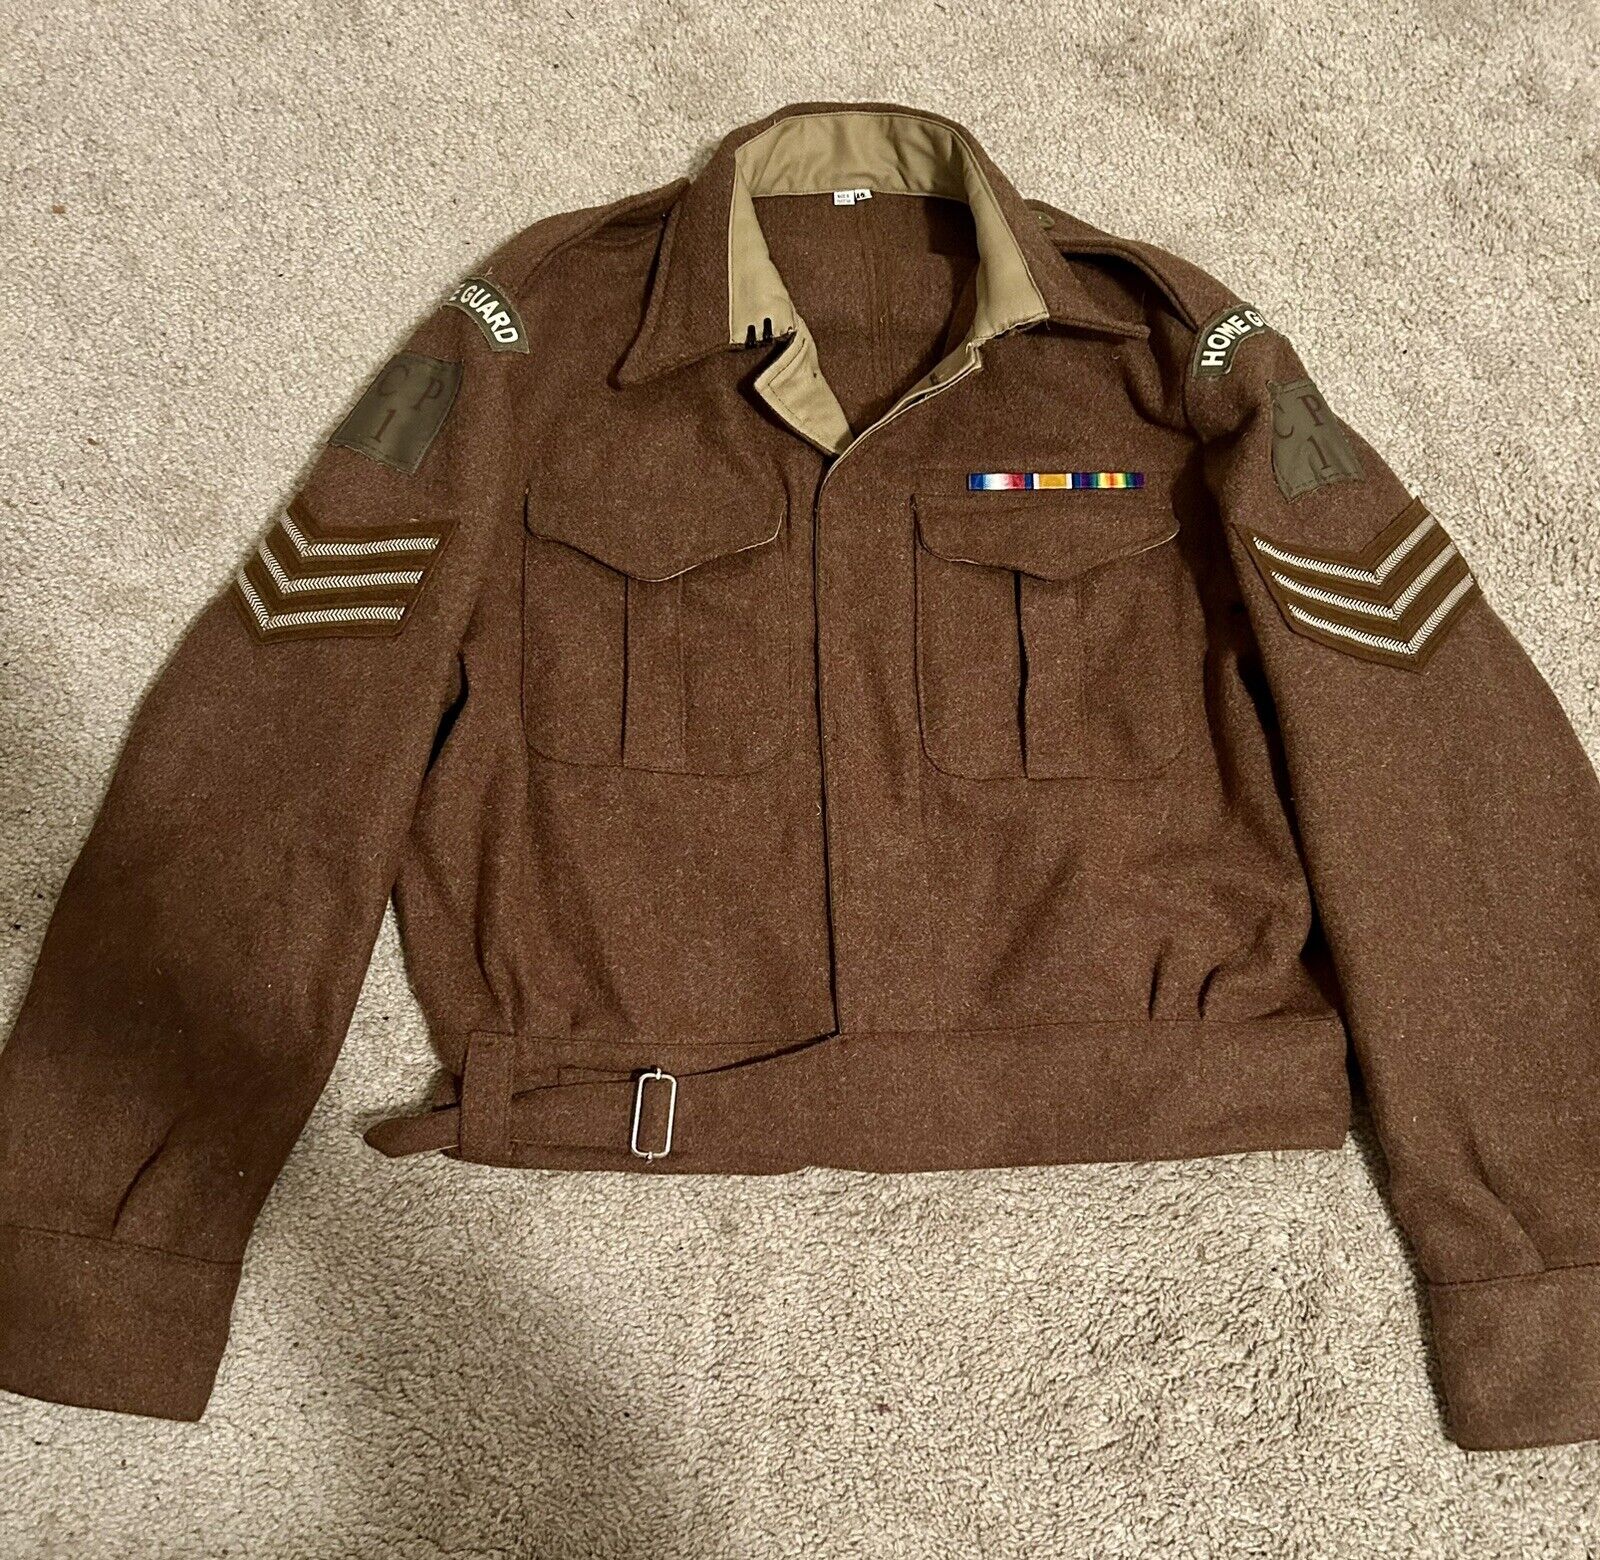 BD 1937 Reproduction w/ Rank and Insignia 